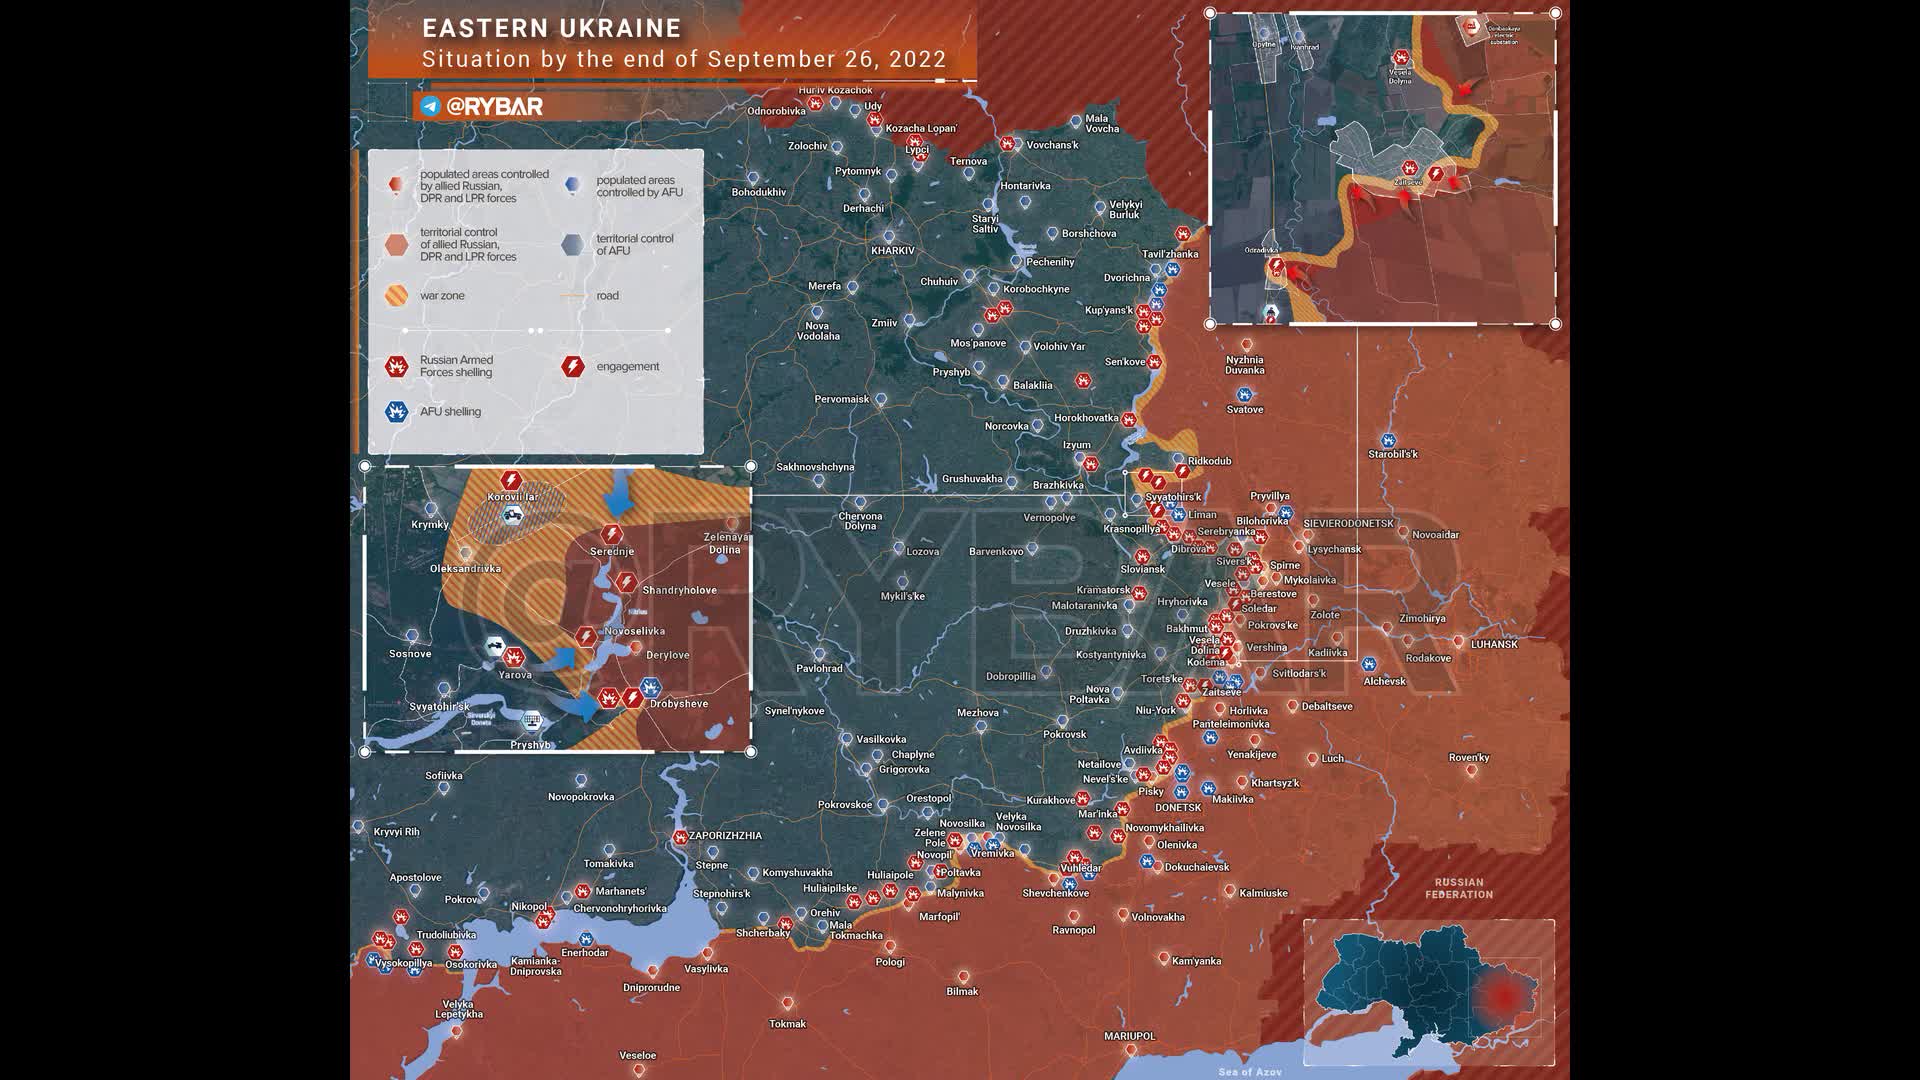 Attack on Donbass: the situation in eastern Ukraine by the end of September 26, 202